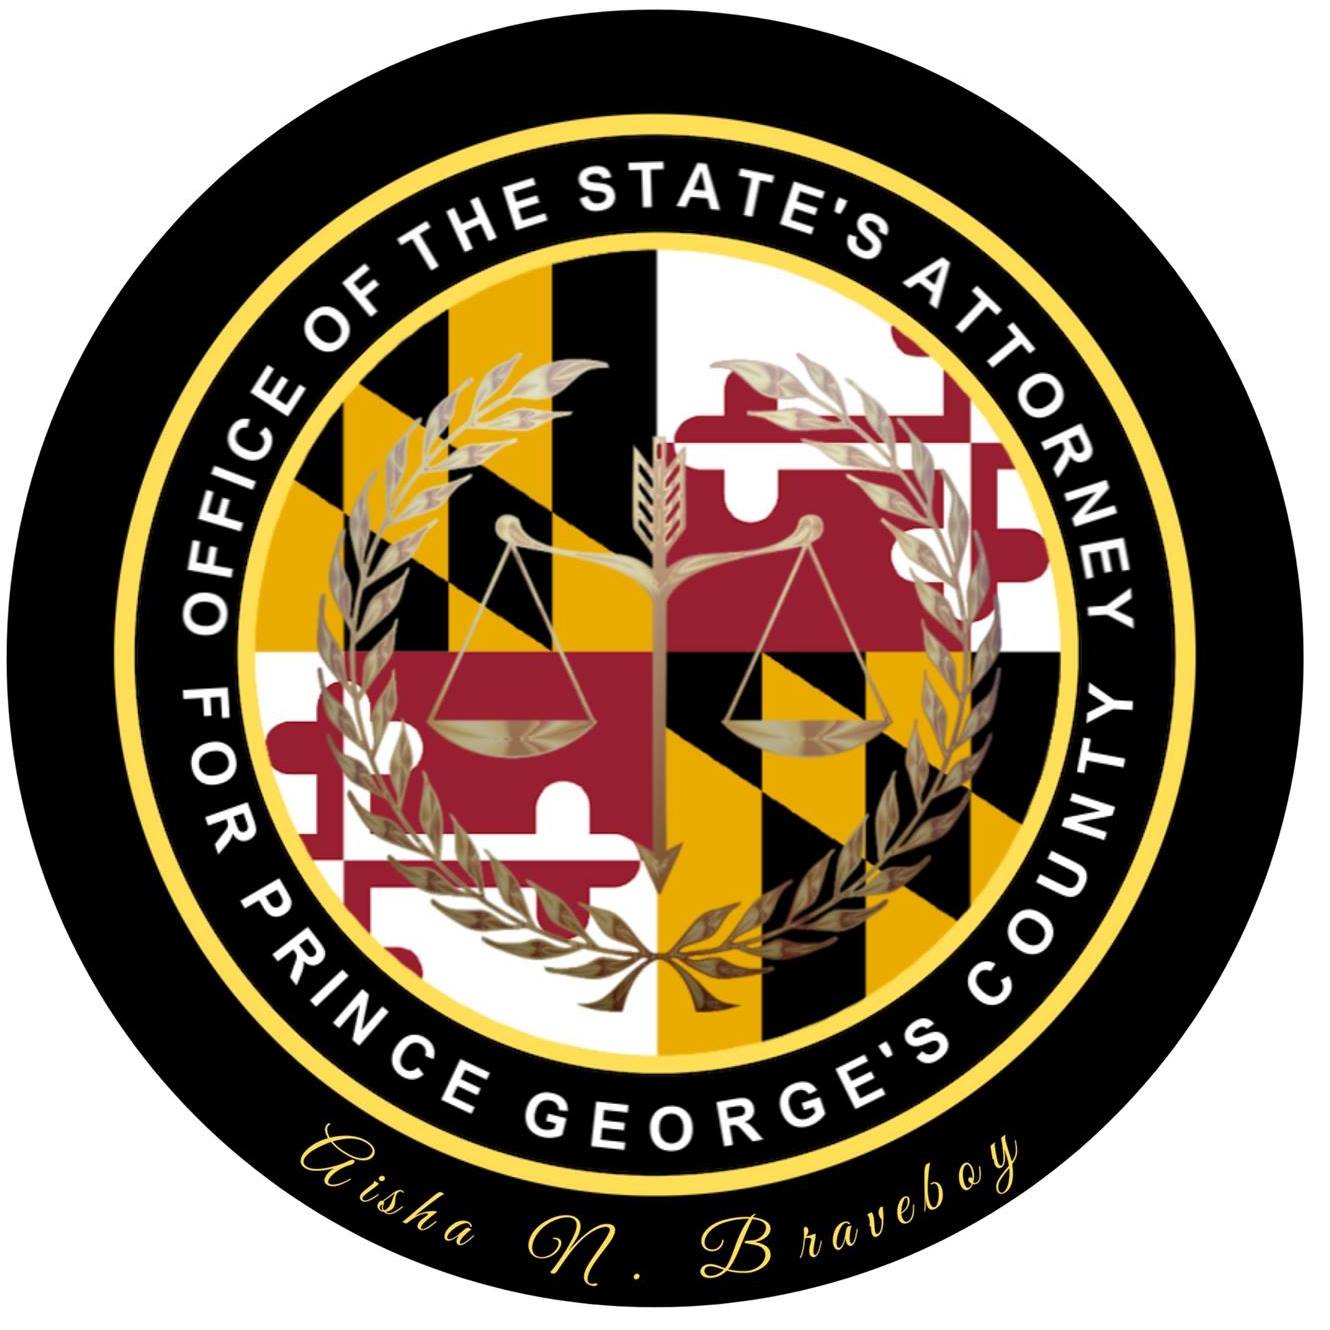 State’s Attorney’s Office for Prince George’s County